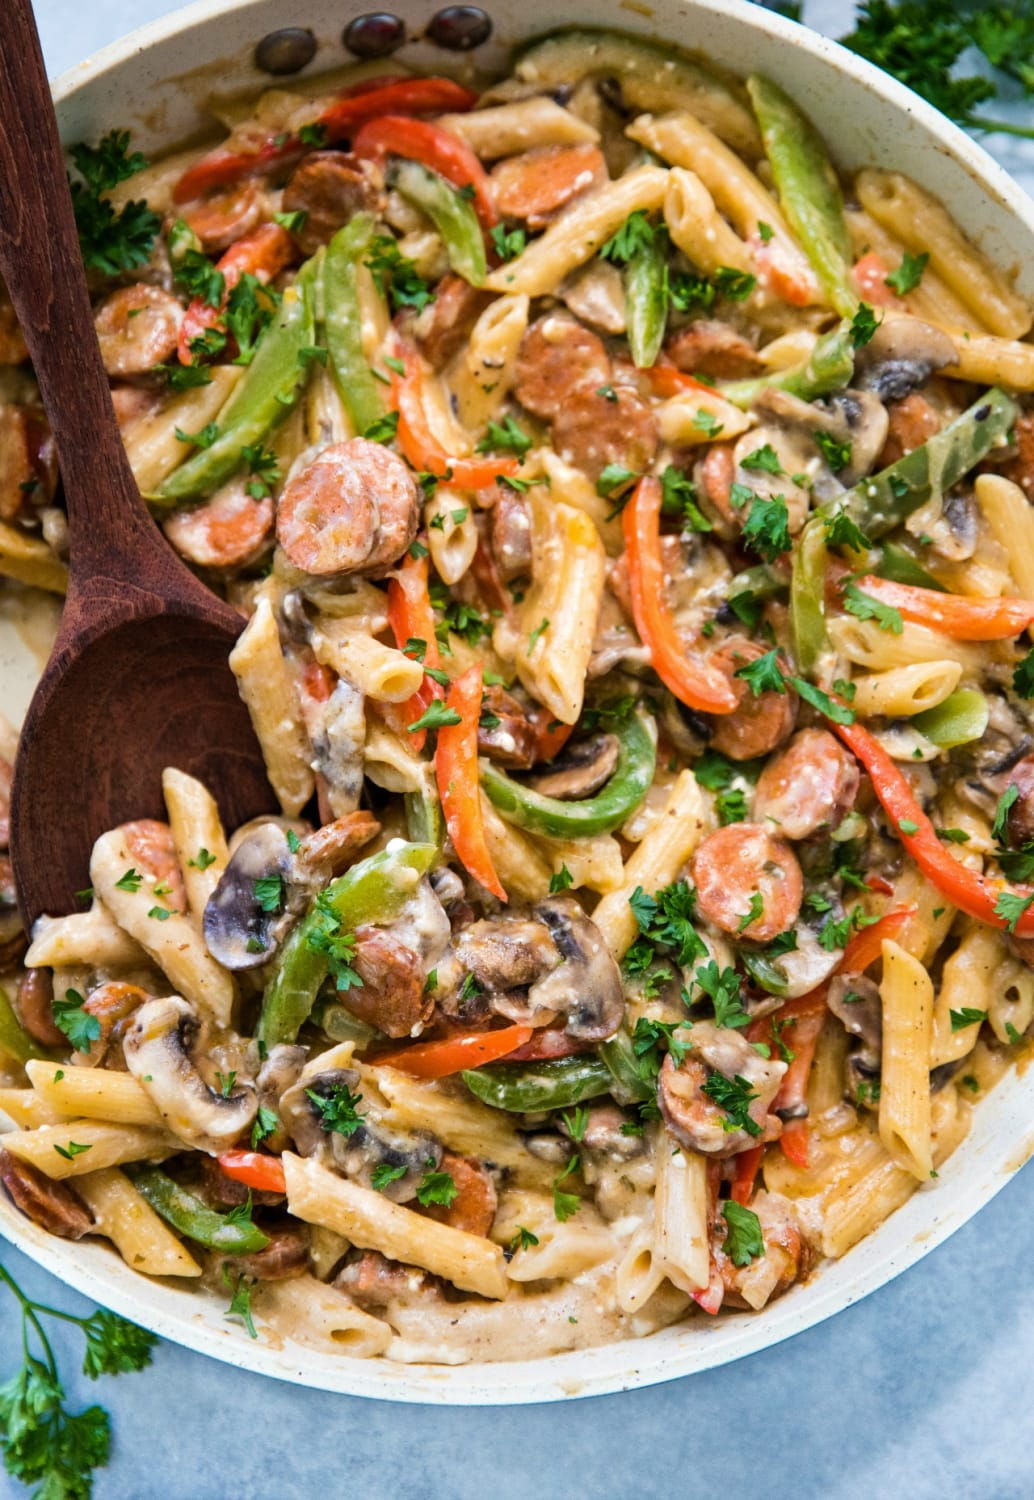 This Cajun Pasta is an easy and tasty dish ready in under 30 minutes.